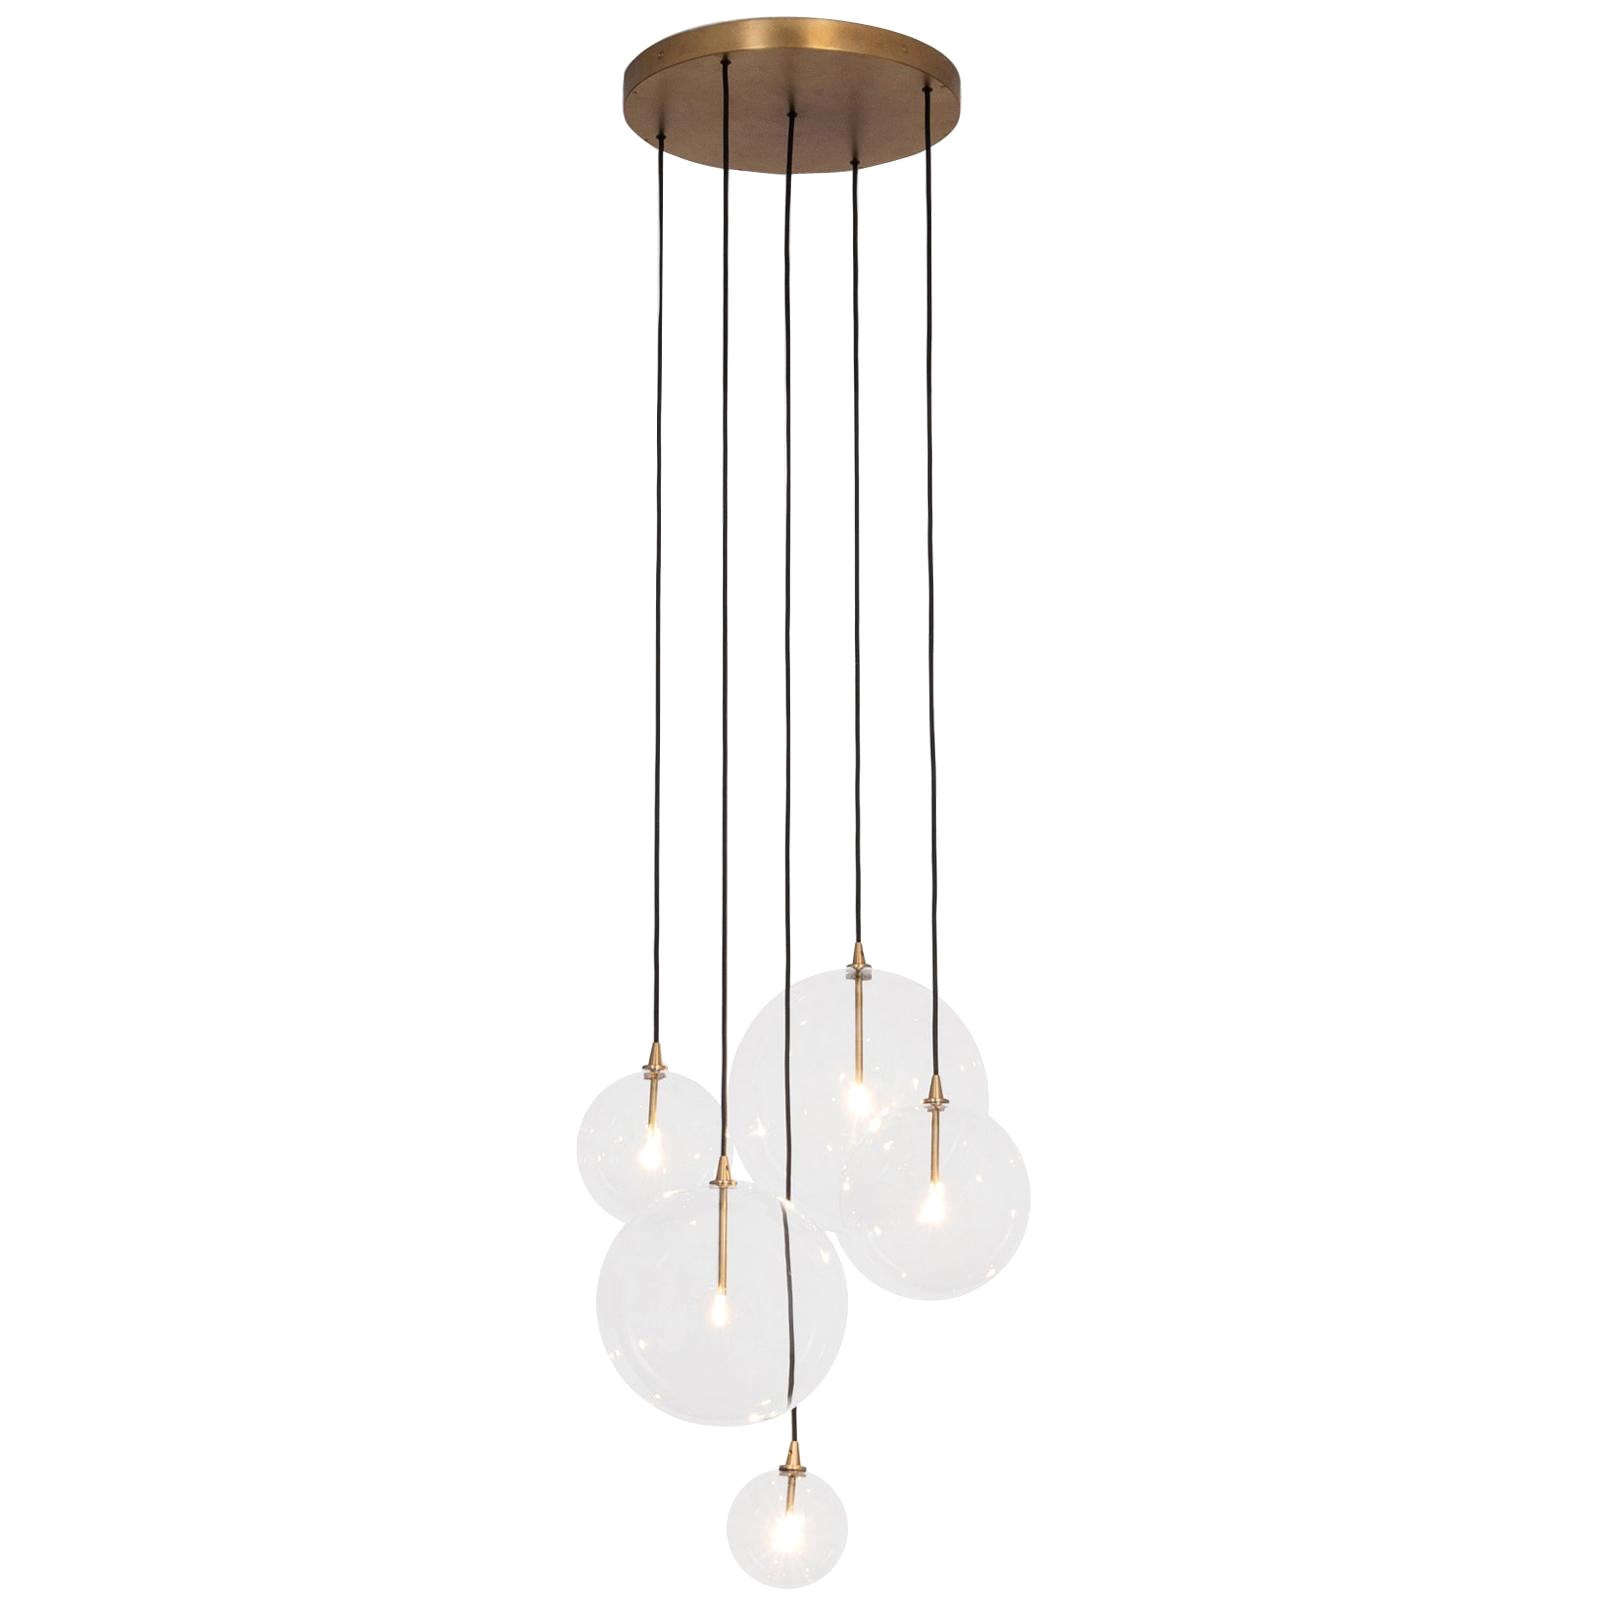 Cluster 5 Mix Chandelier in Solid Brass by Schwung For Sale